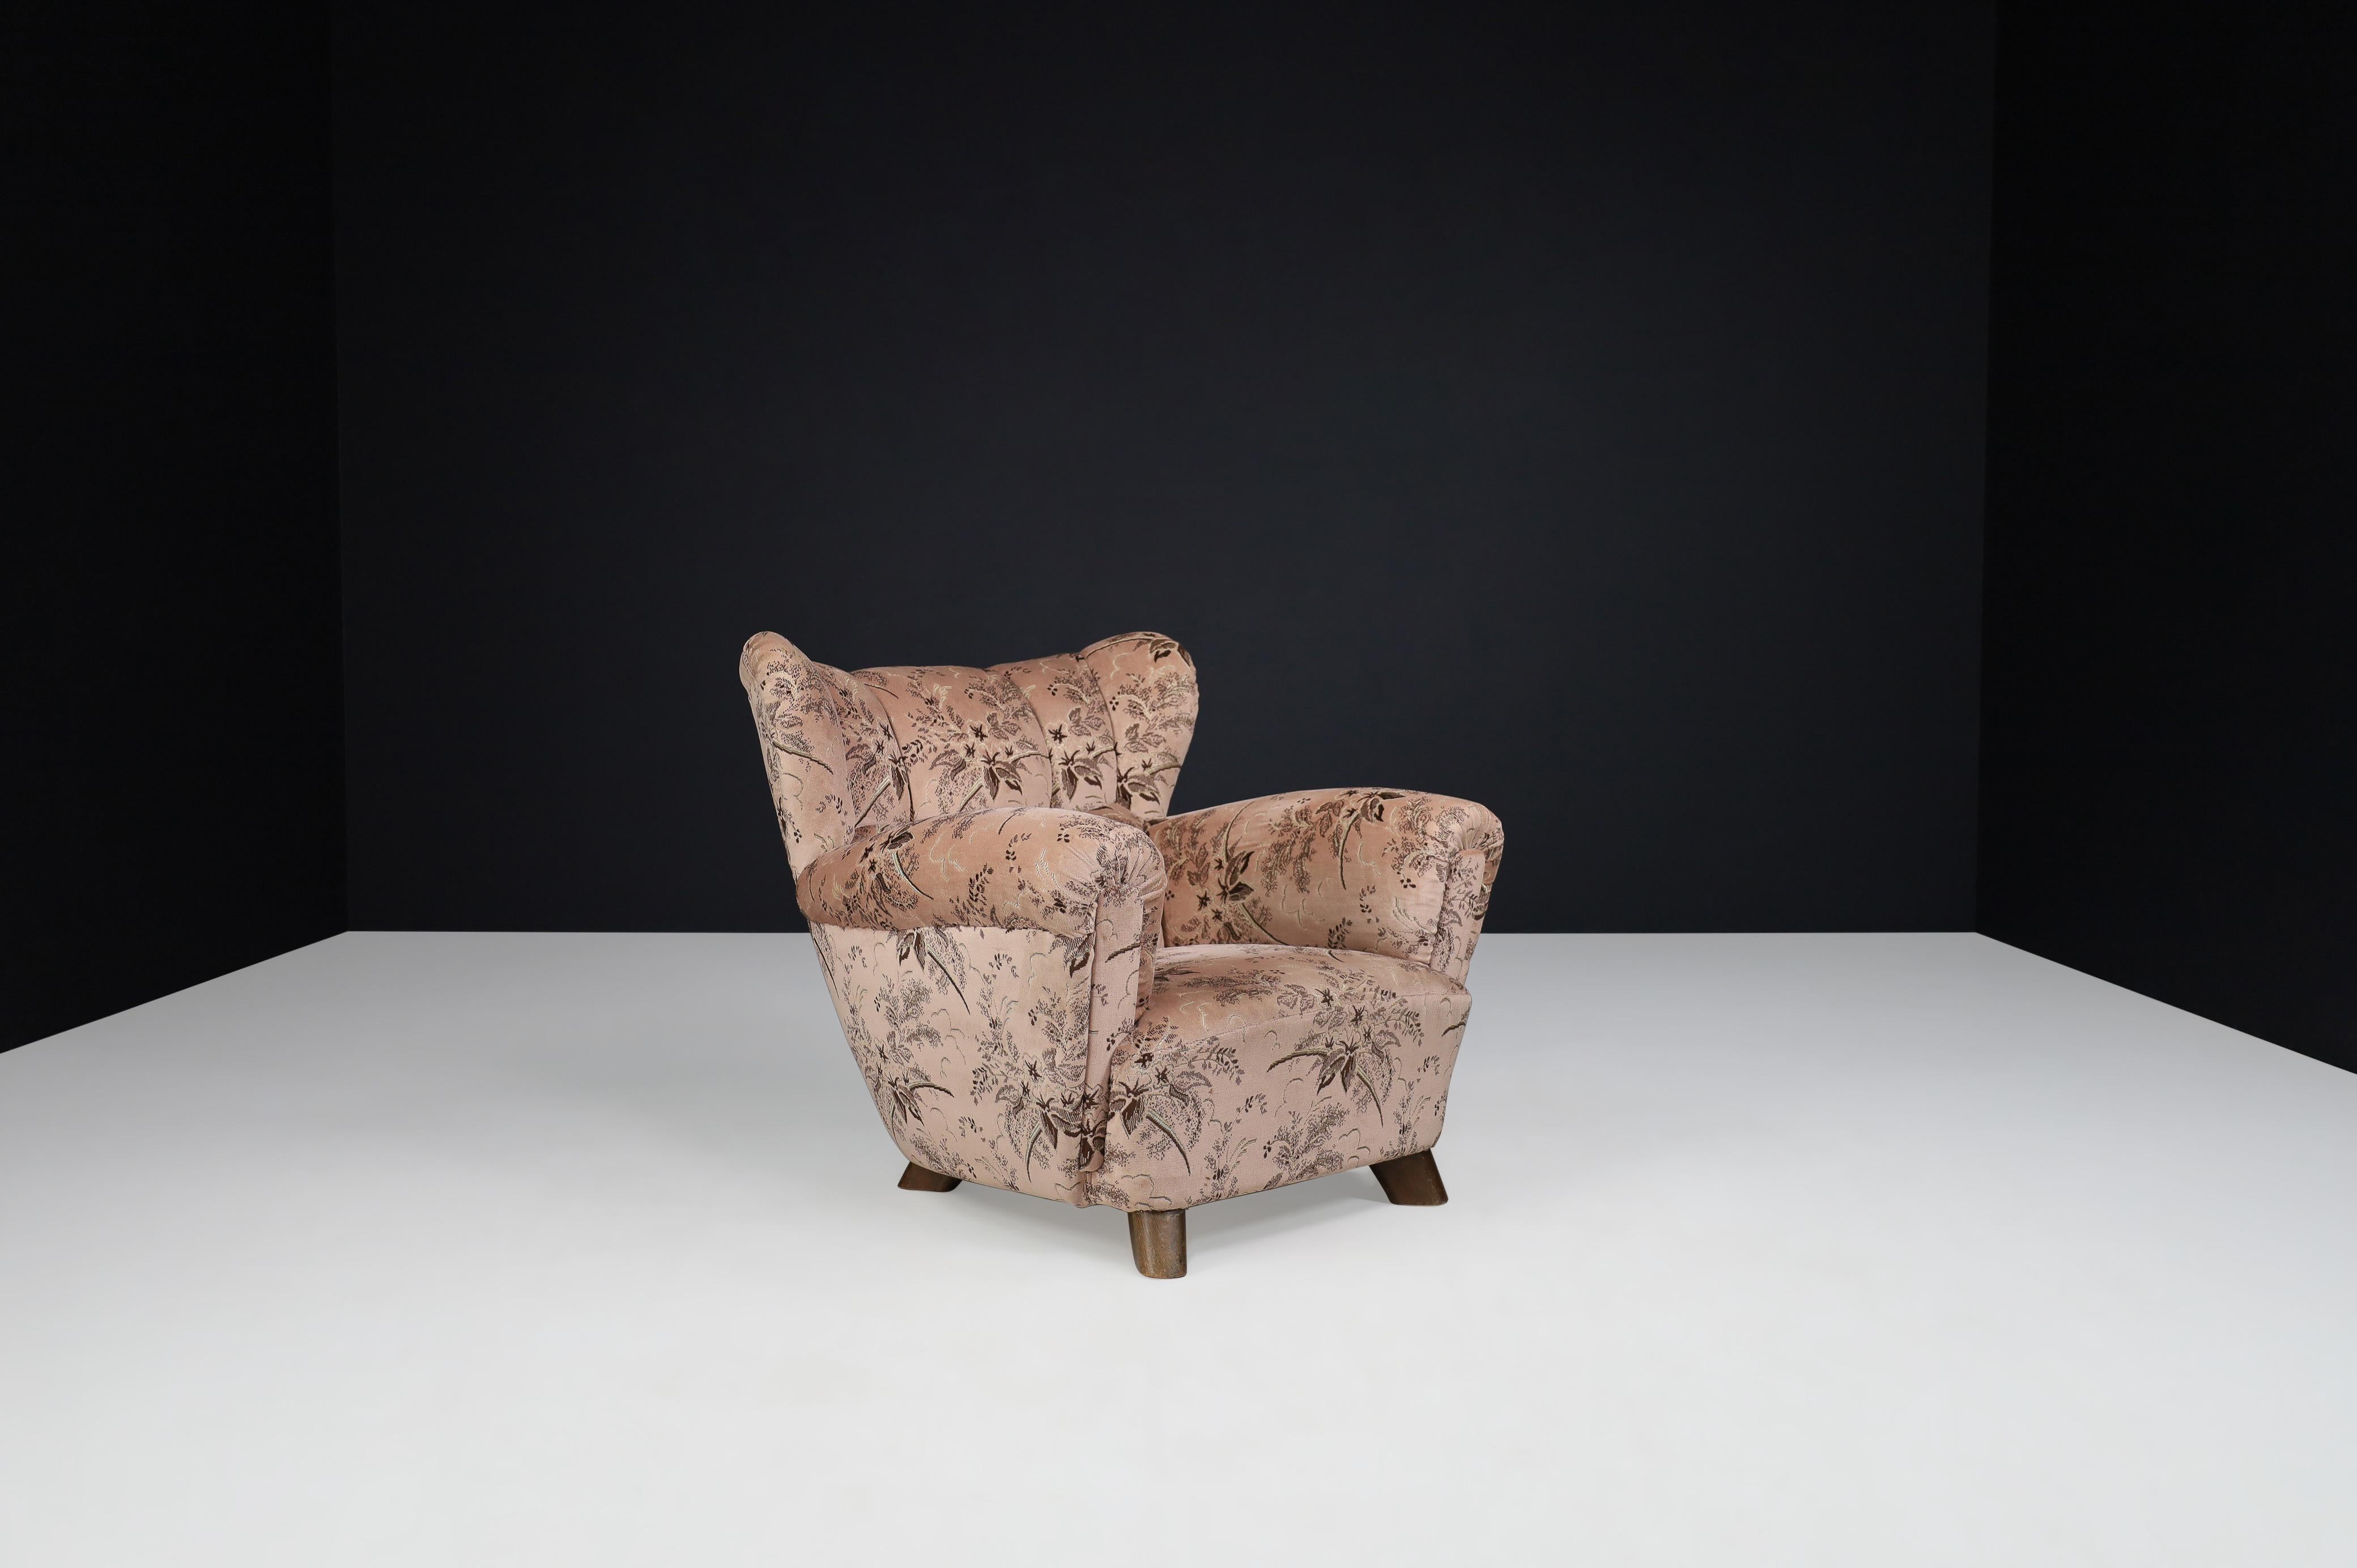 Art Deco Lounge chair in Floral fabric Prague 1930s.

Particular lounge chair in original floral made in Prague and production of the 1930s in Art Deco style. The large armchair has a characteristic, visually exciting shape thanks to its elegant